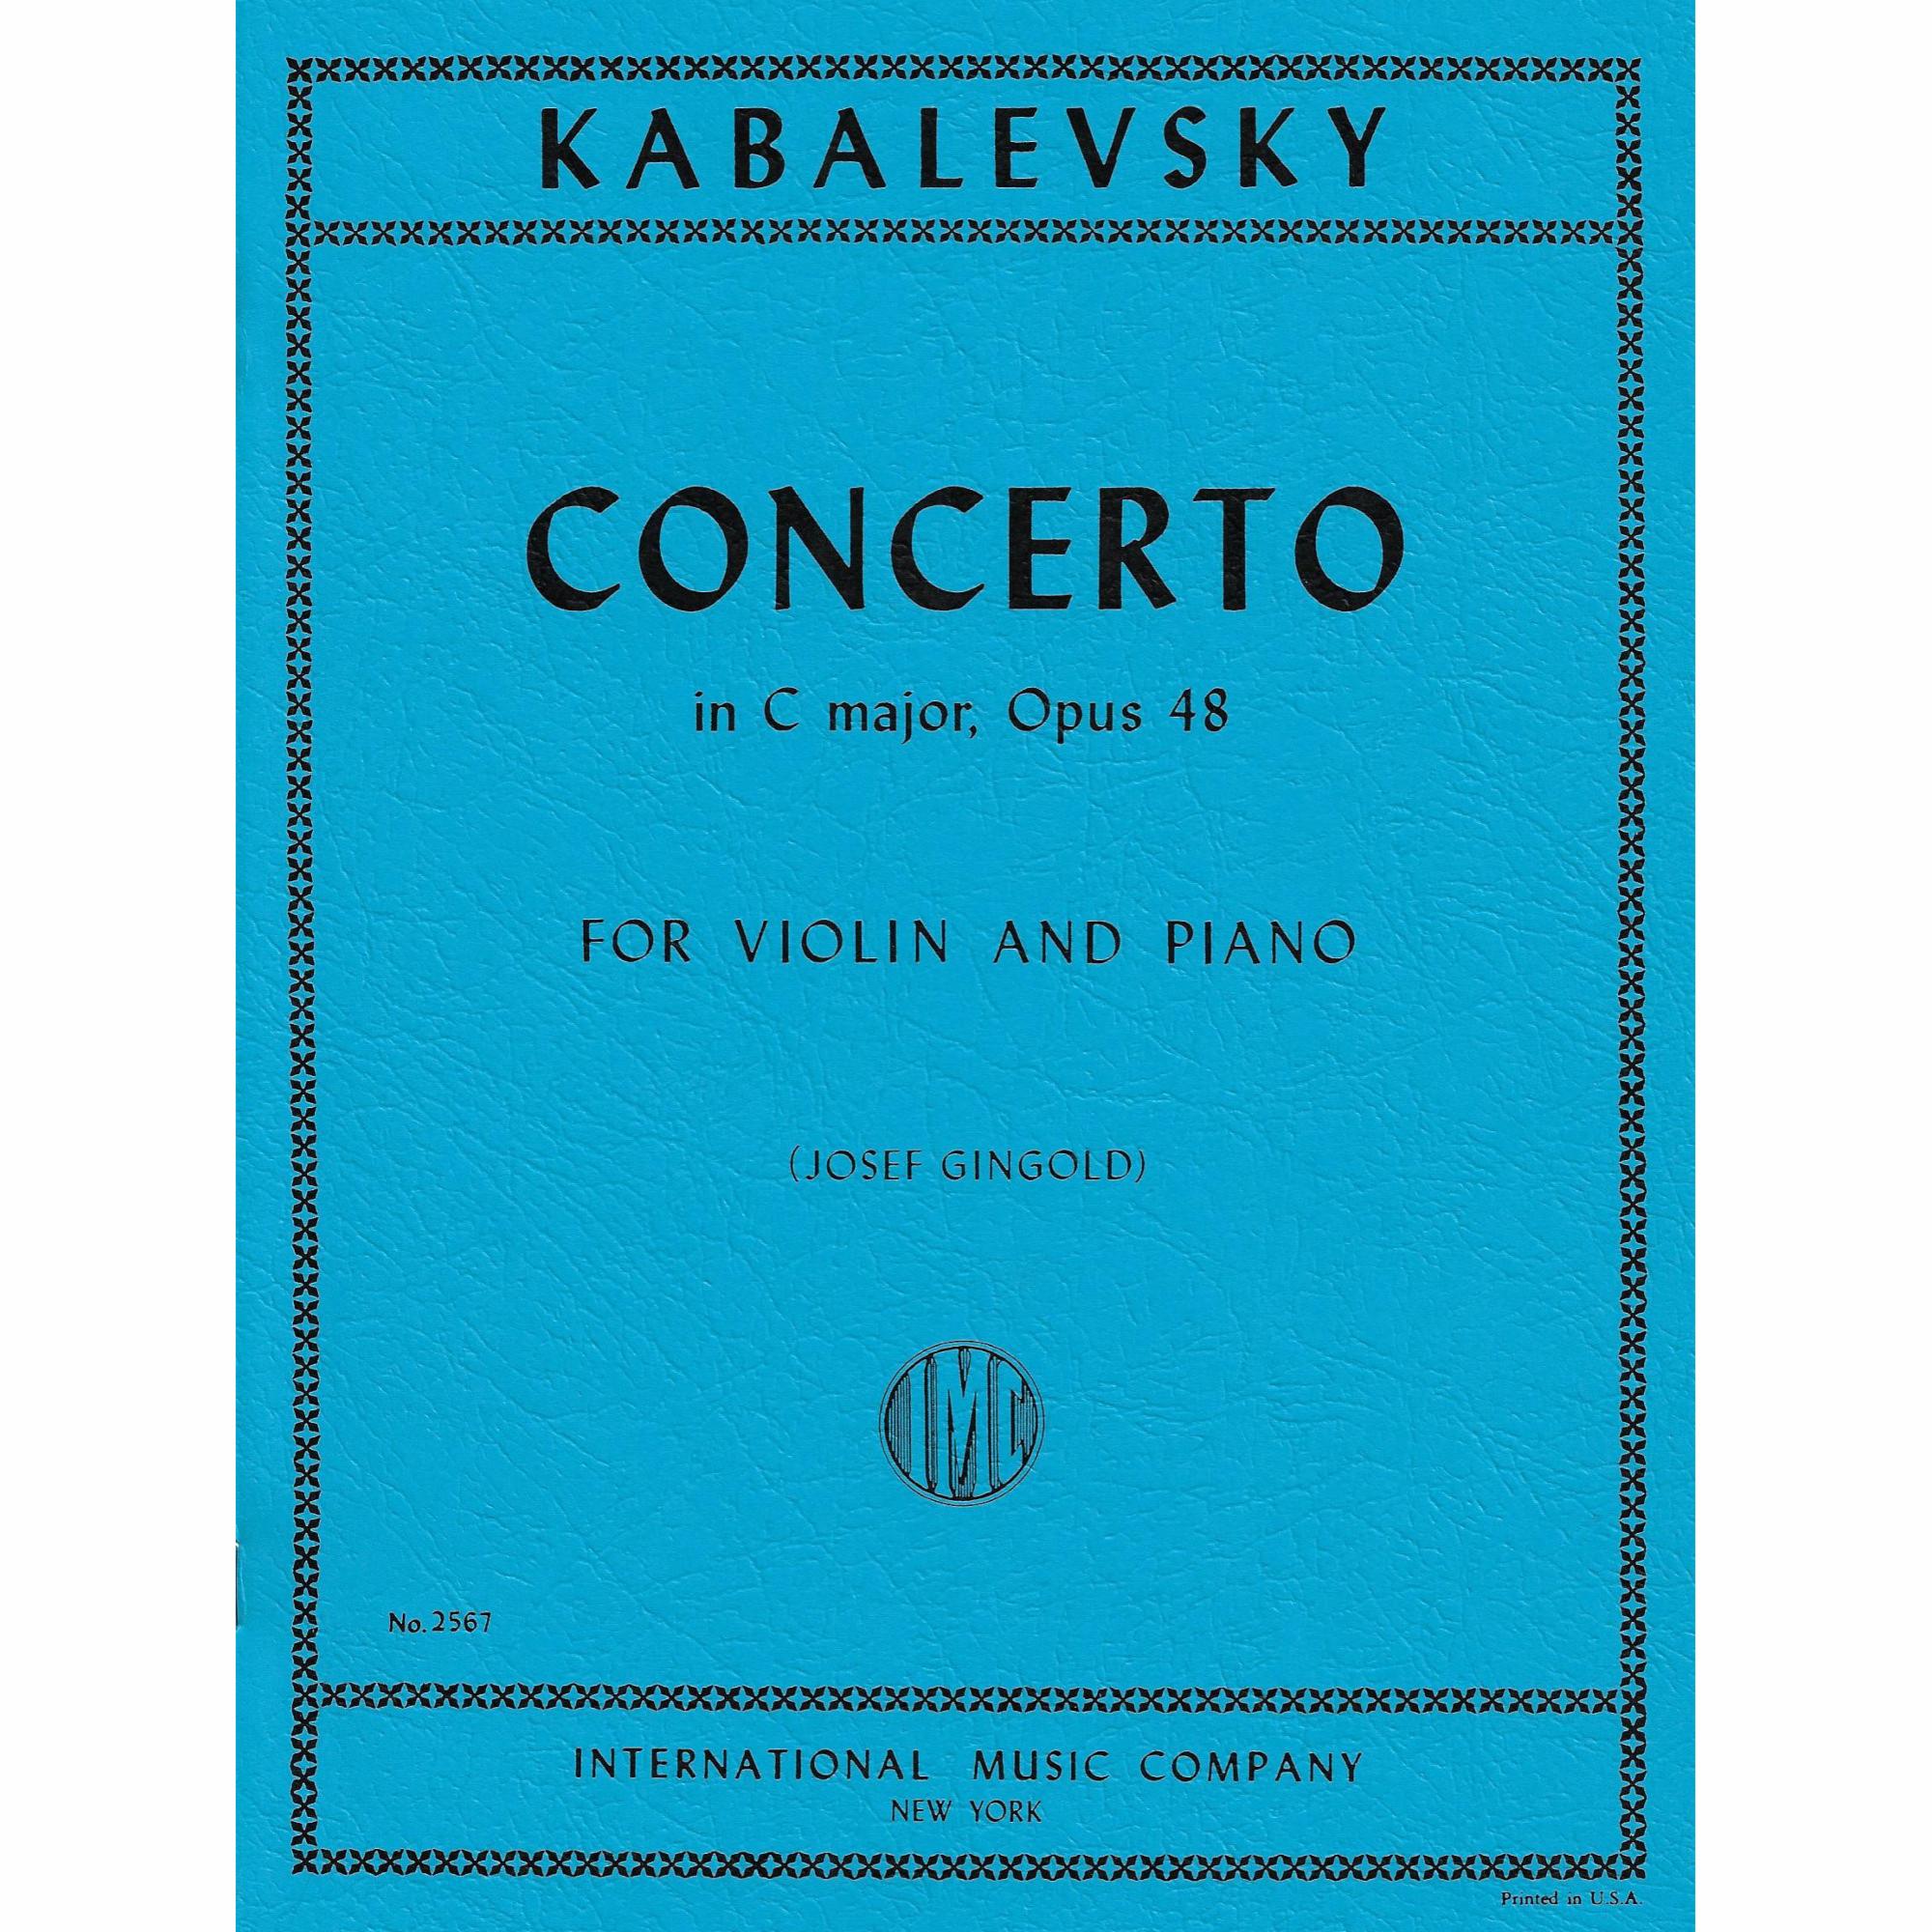 Kabalevsky -- Concerto in C Major, Op. 48 for Violin and Piano